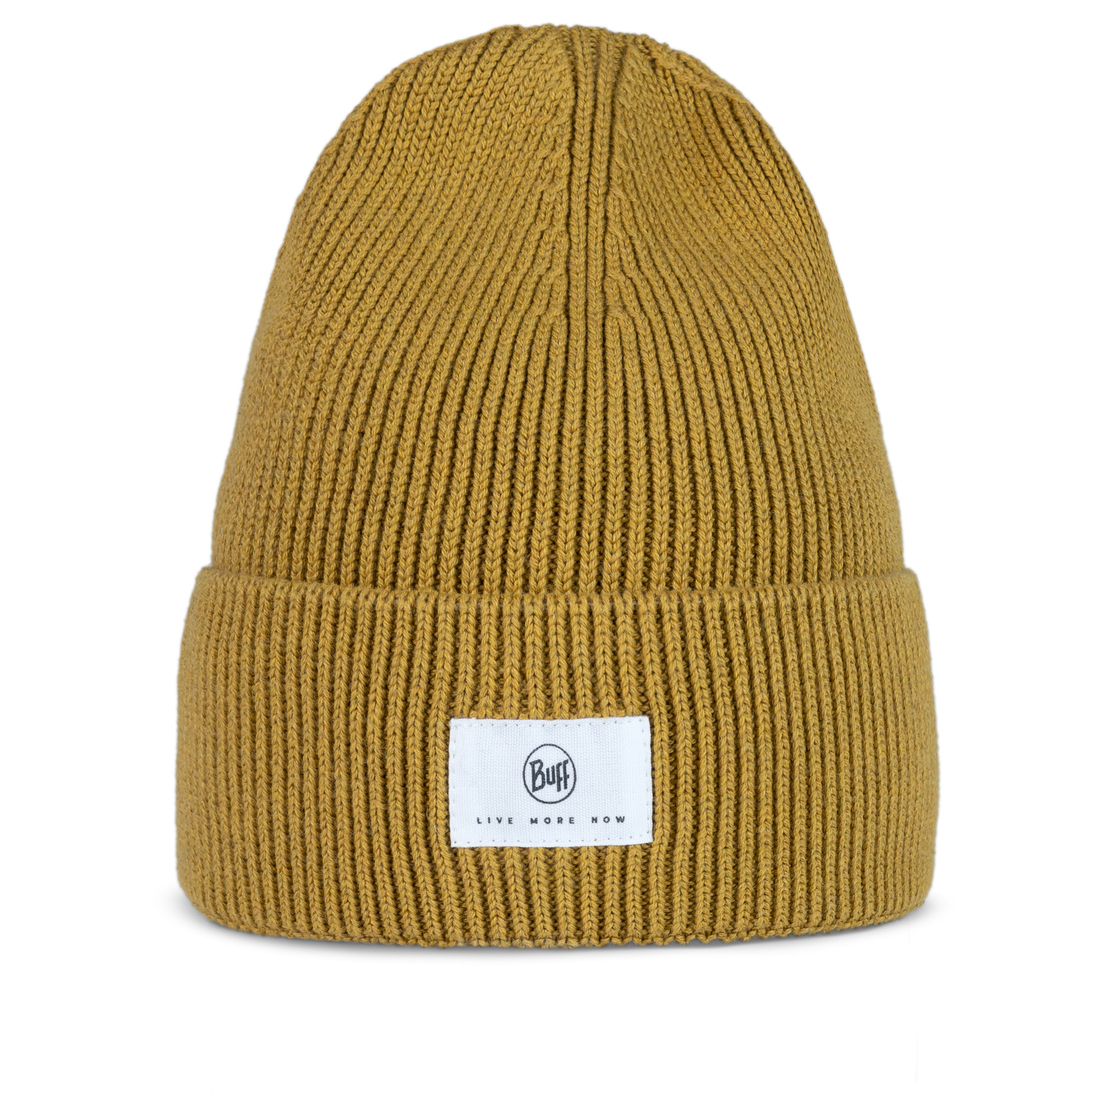 Кепка Buff Knitted Beanie Drisk, цвет Citronella